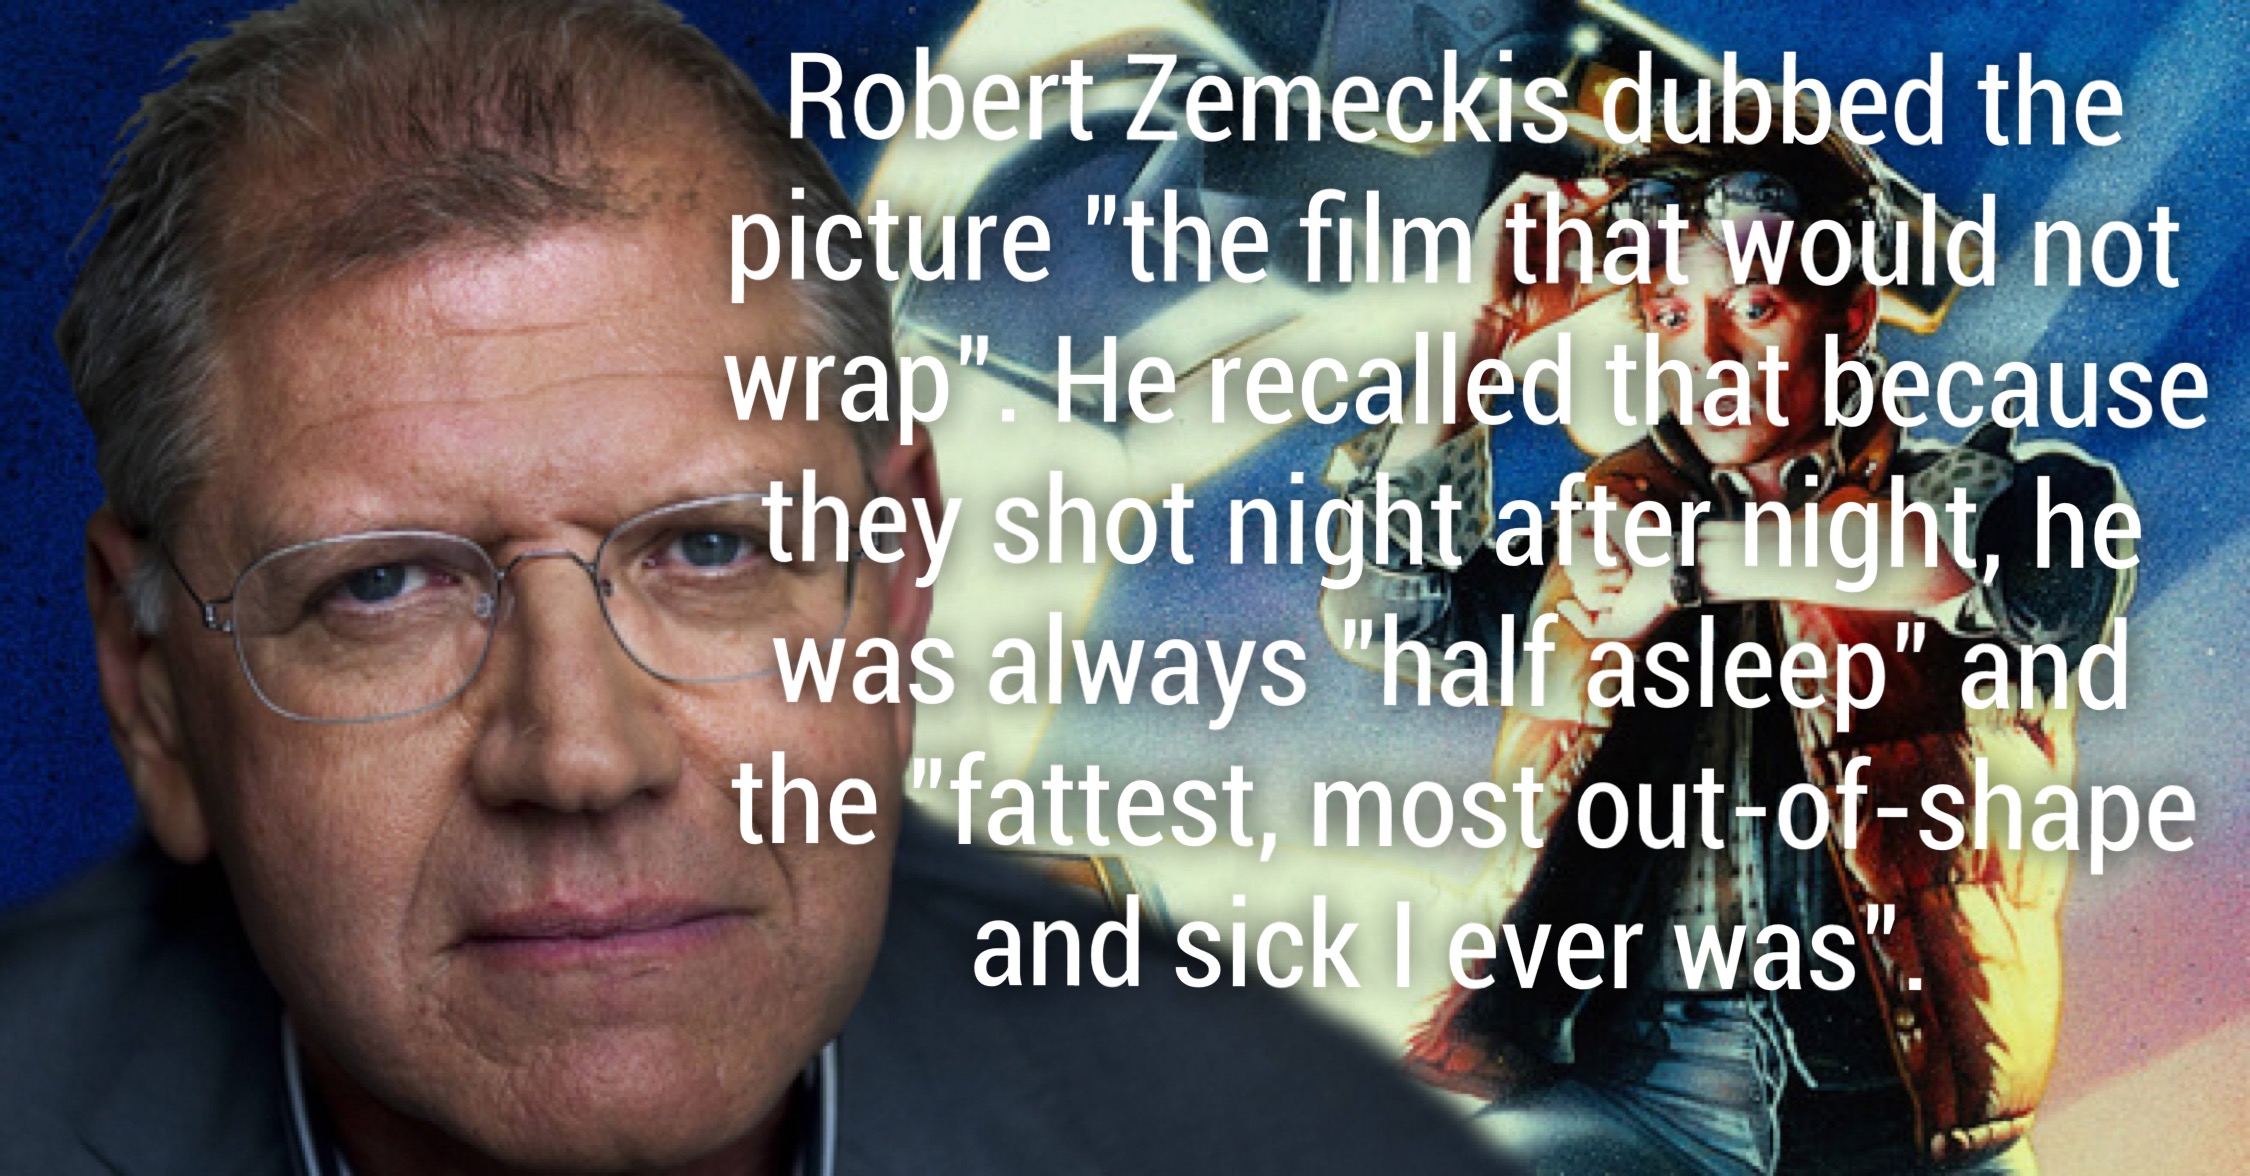 back to the future meme - Robert Zemeckis dubbed the picture "the film that would not wrap" He recalled that because they shot night after night, he was always "half asleep" and the "fattest, most outofshape and sick I ever was".